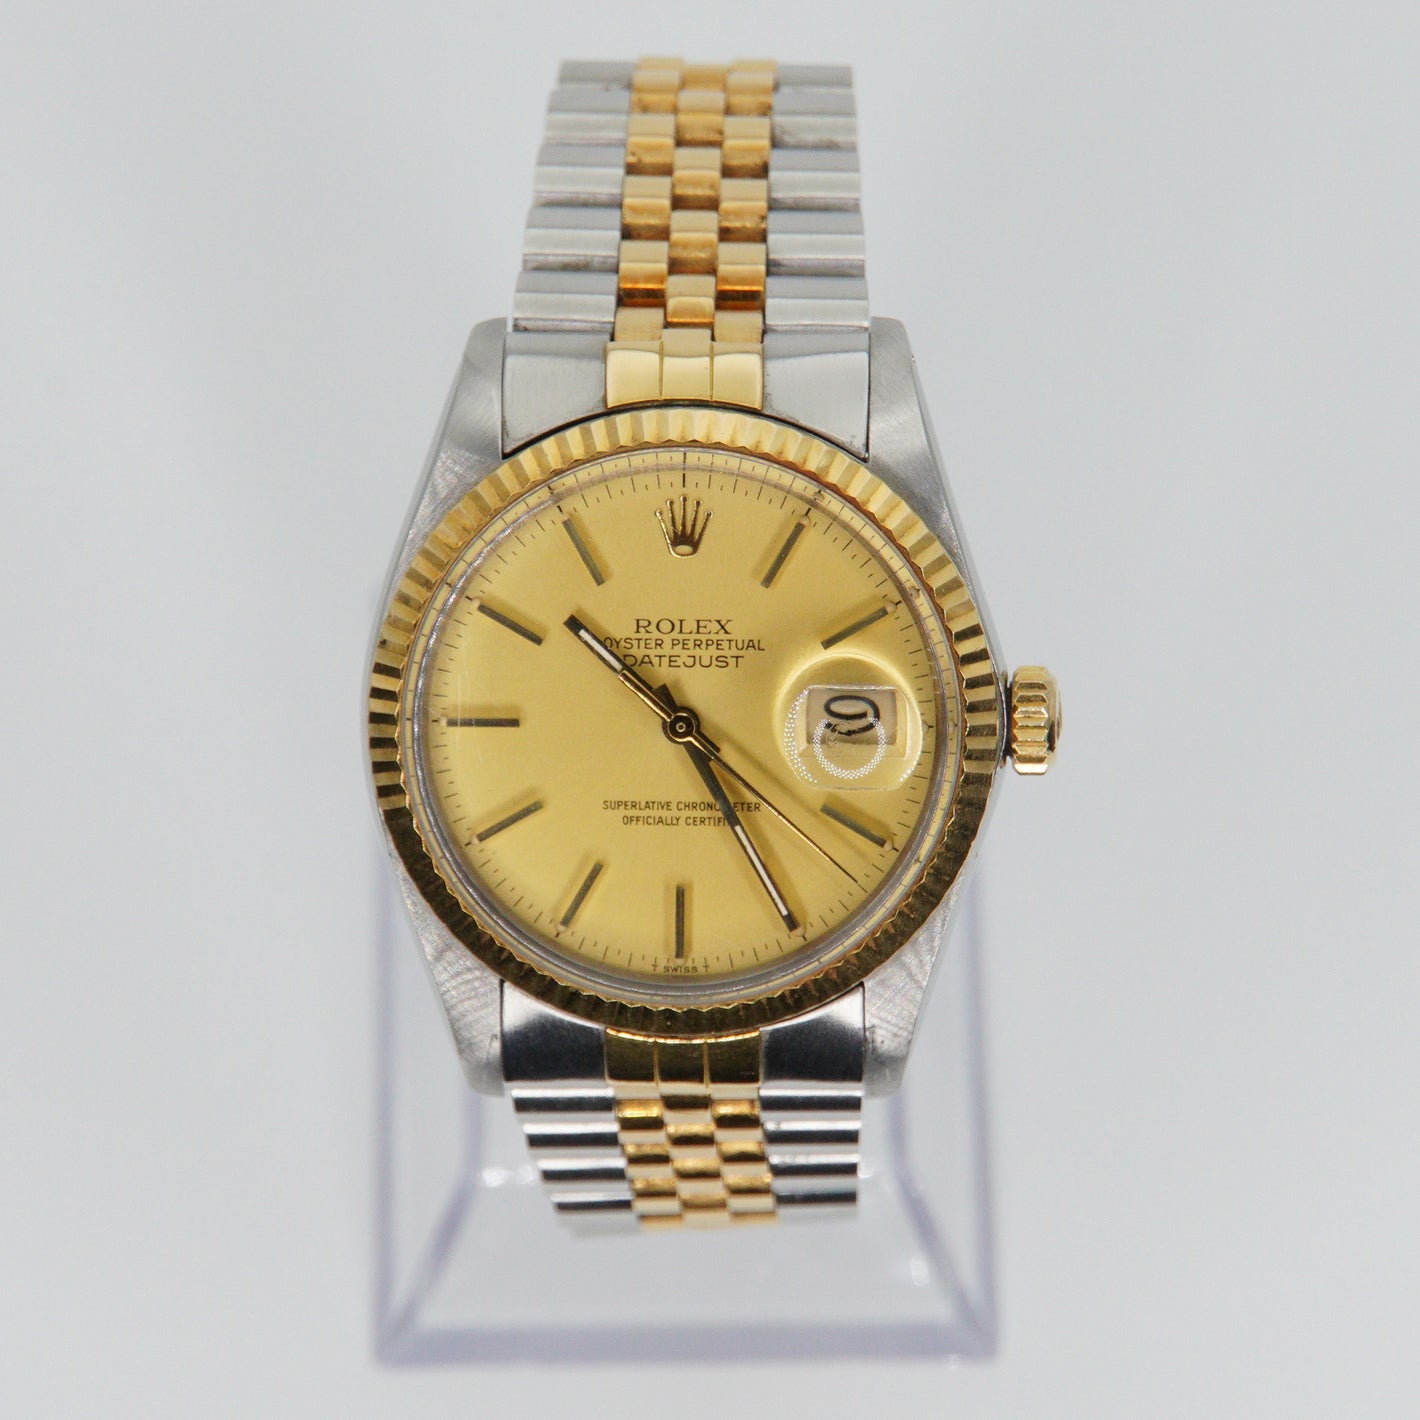 Rolex Datejust 36mm 16013 - 18k Yellow Gold & Stainless Steel - Gold Face